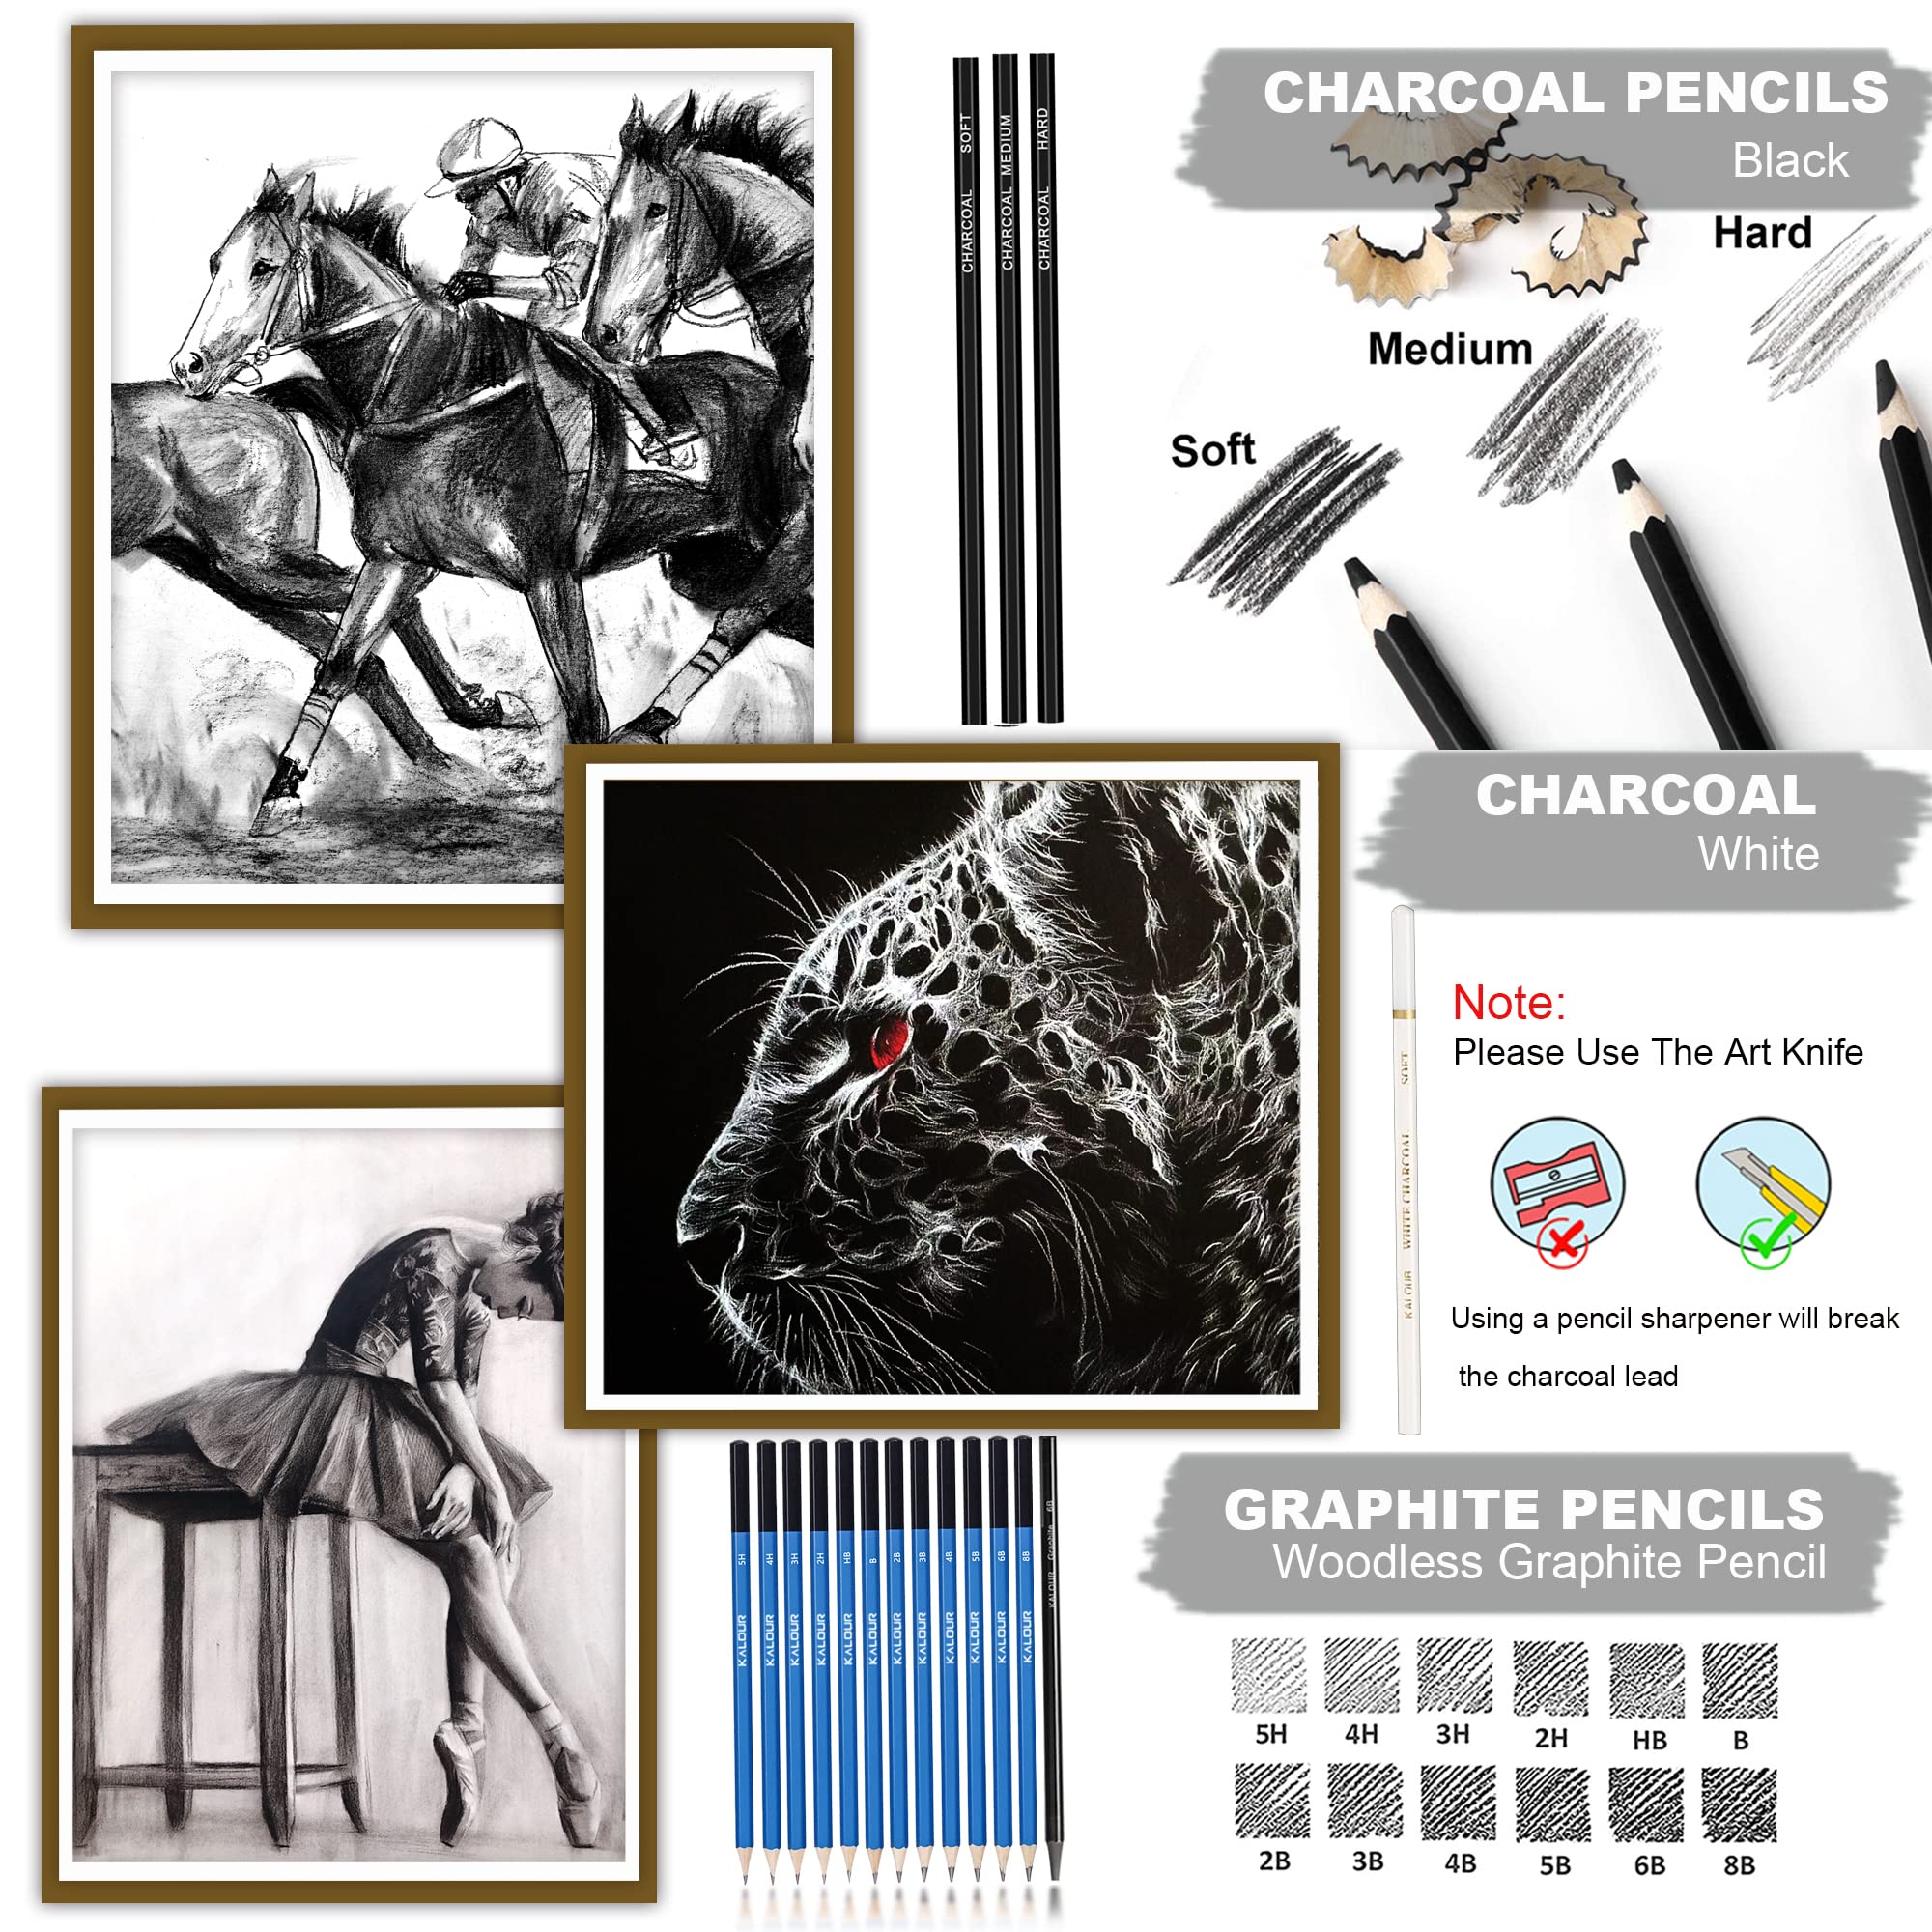 How to Draw With Charcoal - Step-by-Step Guide with Video